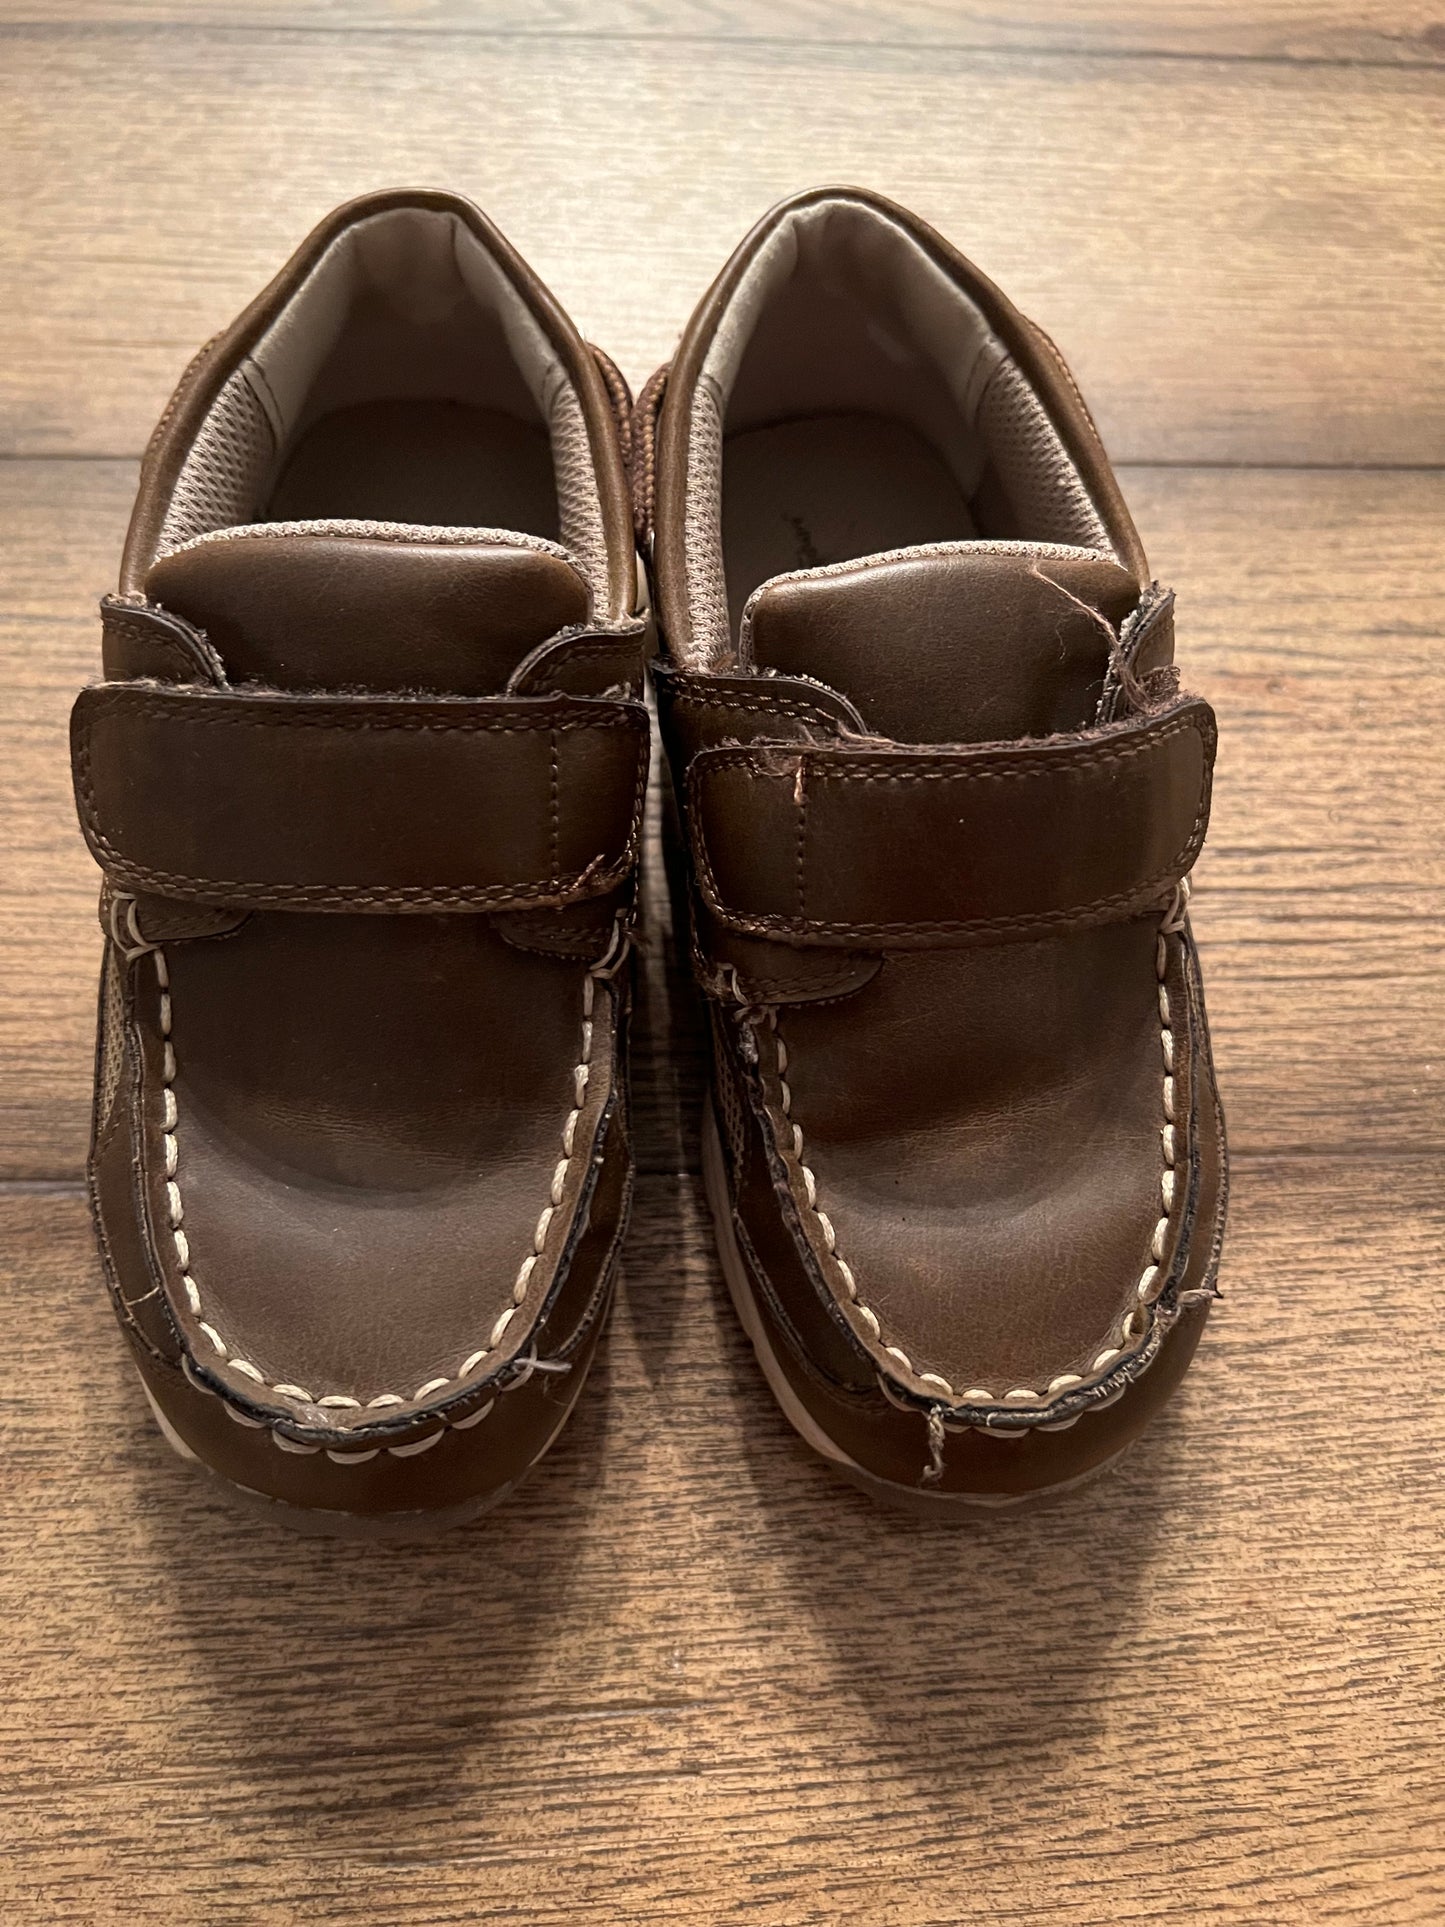 Boys shoe size 11 Jumping Bean "Sperry Style" Loafers  PPU Anderson